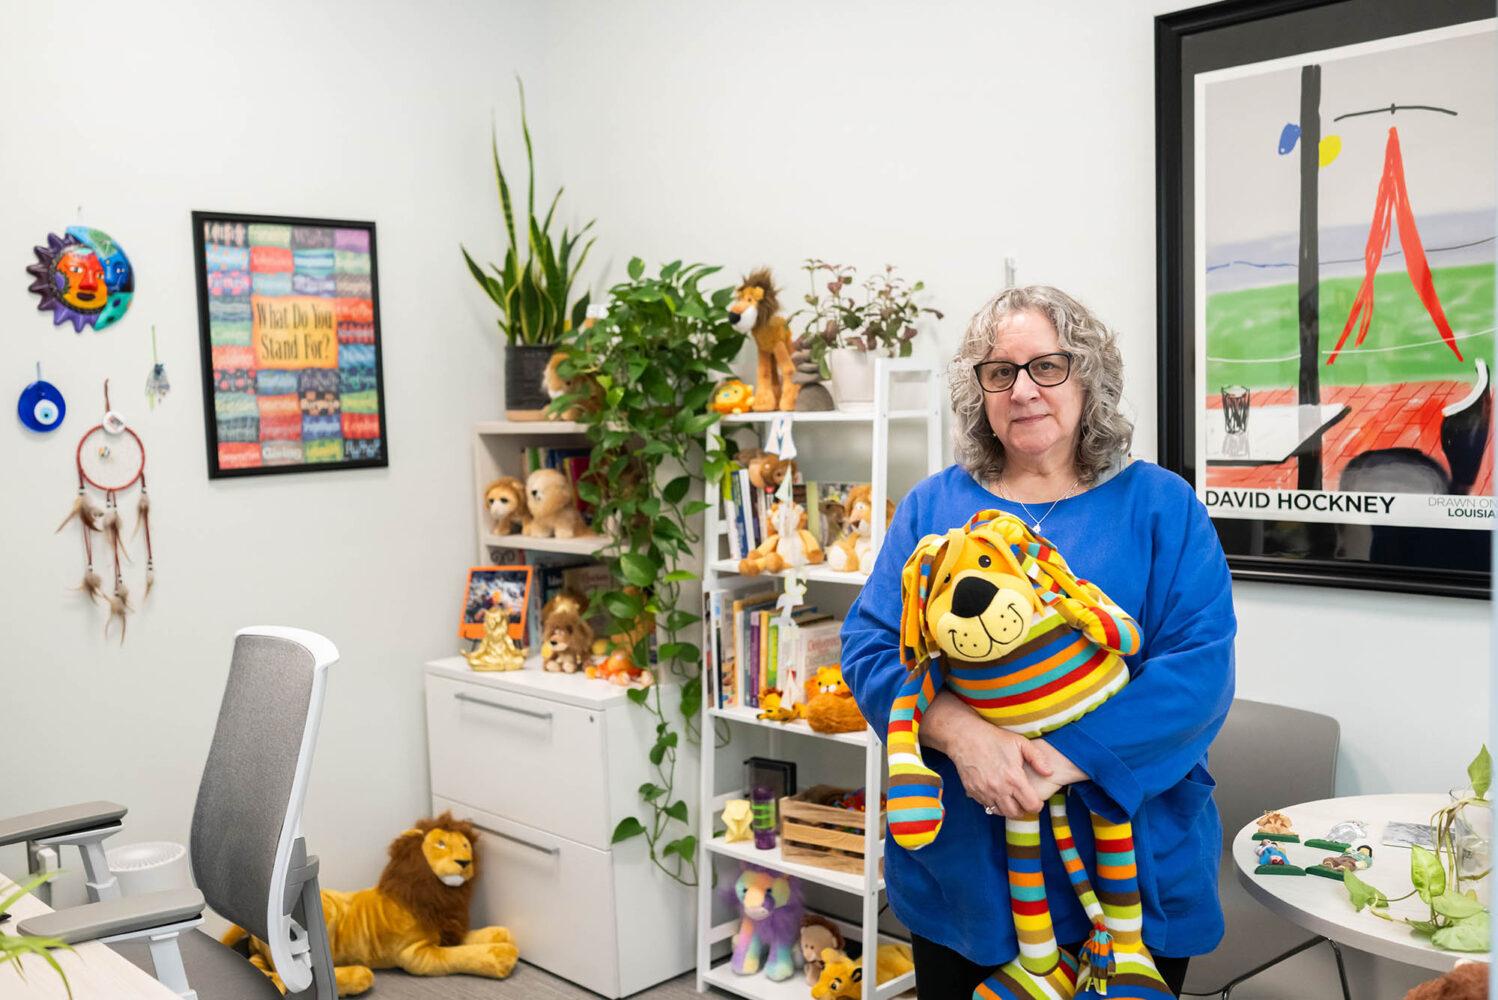 Photo: Roz Abukasis, a women wearing a bright blue shirt and holding a stuffed lion, smiles for a portrait inside her office. Abukasis is an academic counselor at Sargent.